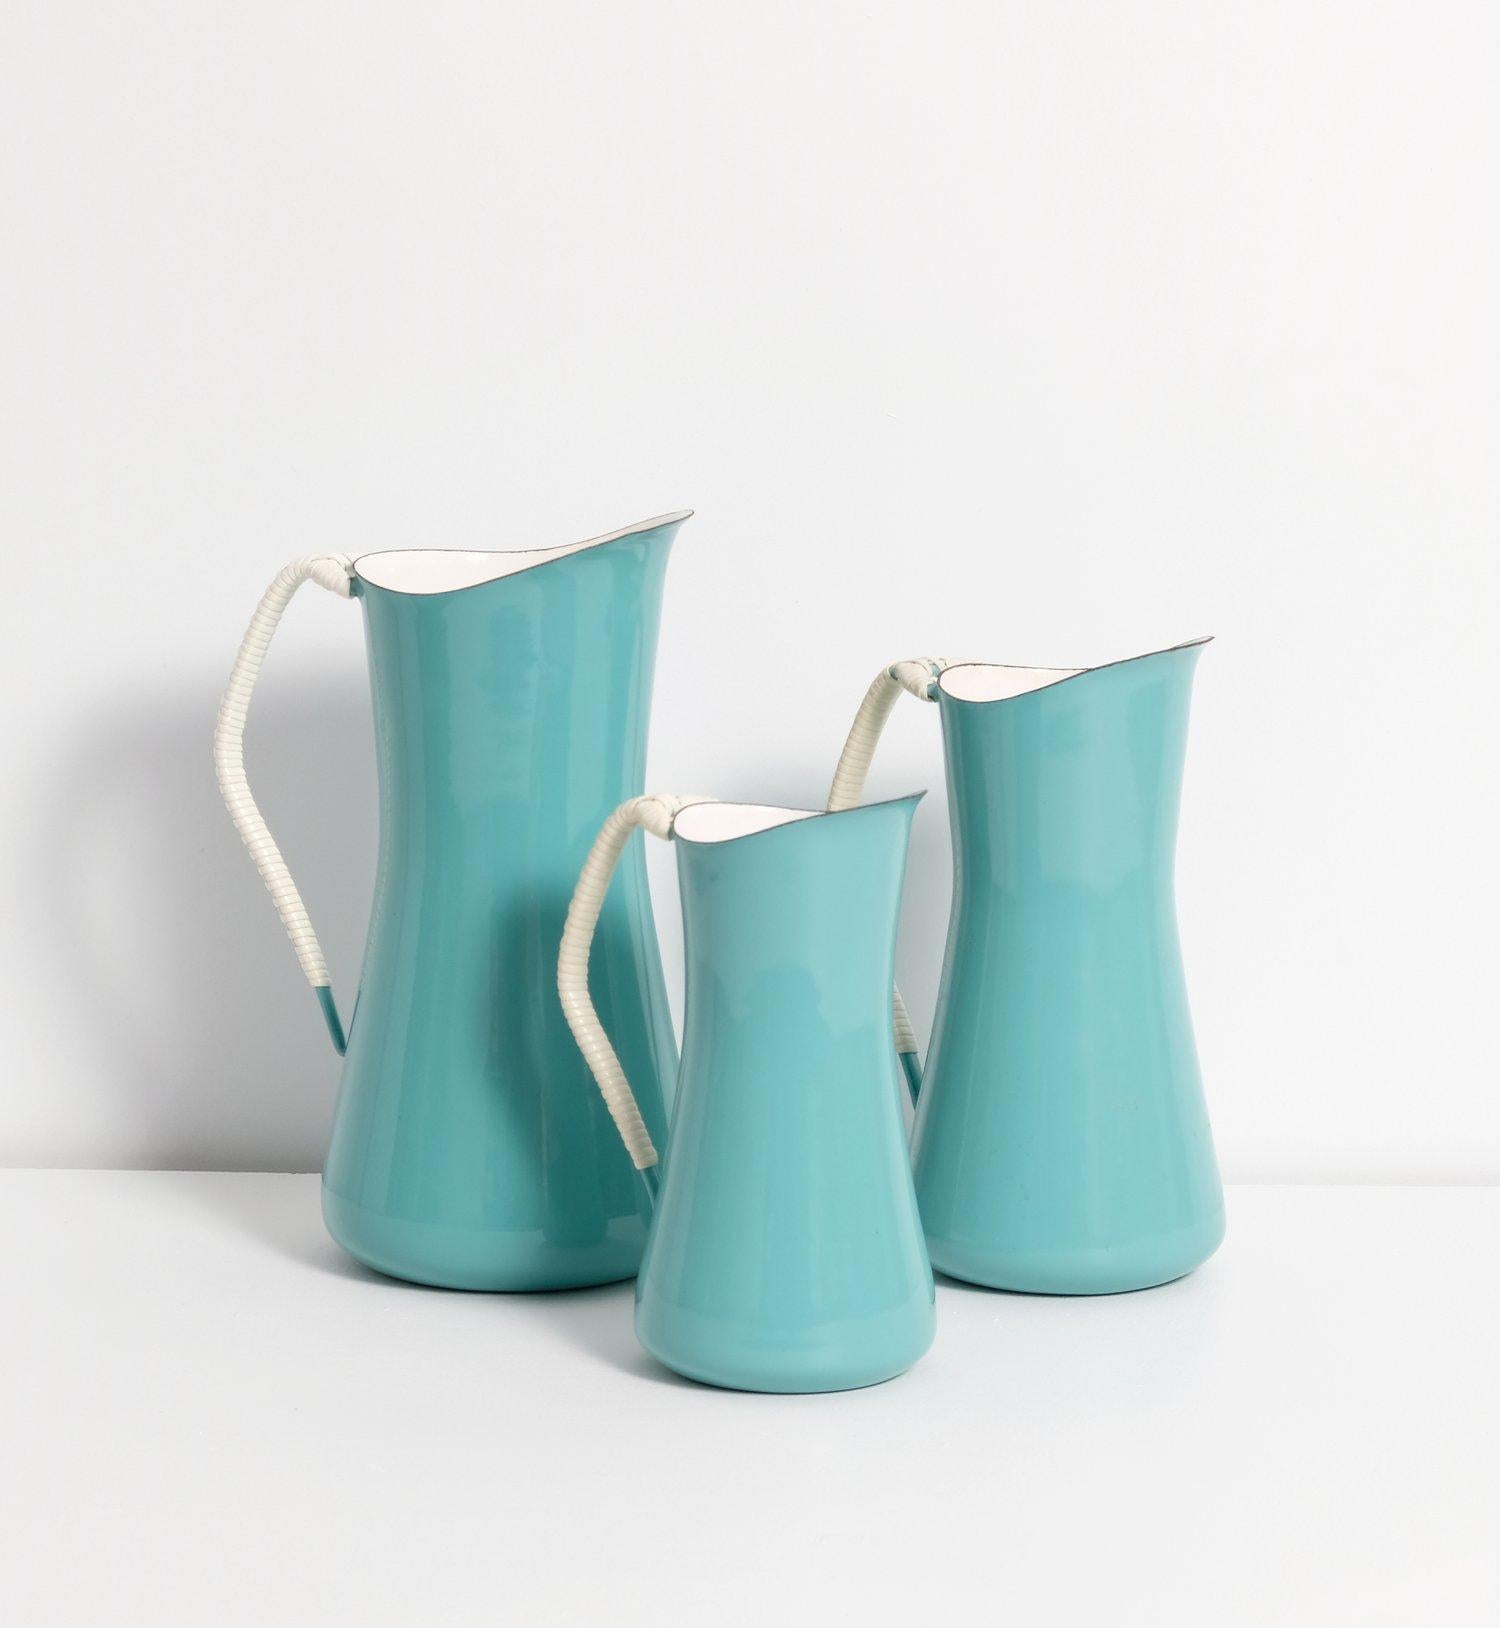 Near mint set of three Dansk Kobenstyle IHQ turquoise/teal pitchers designed by Jens Quistgaard, 1956, early 4 ducks logo produced in Denmark.

Large pitcher: 10.5” high x 5.5 wide

Medium pitcher: 9” high x 5” wide

Small pitcher: 8” high x 4.5”